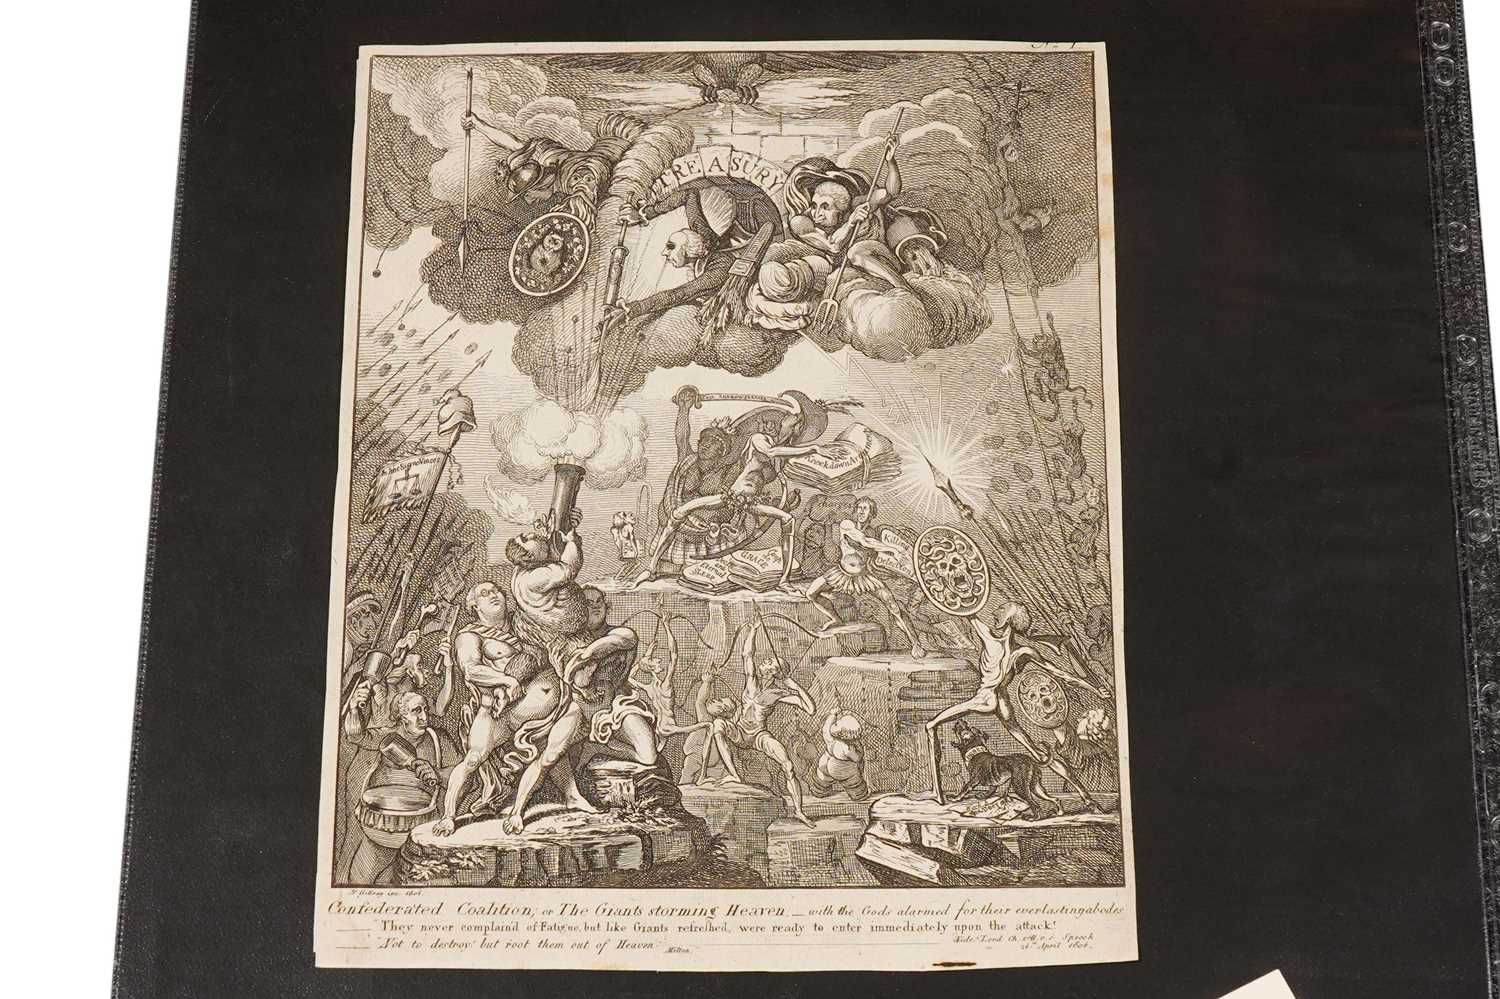 James Gillray - Confederated-Coalition;-or-The Giants storming Heaven | etching - Image 2 of 2